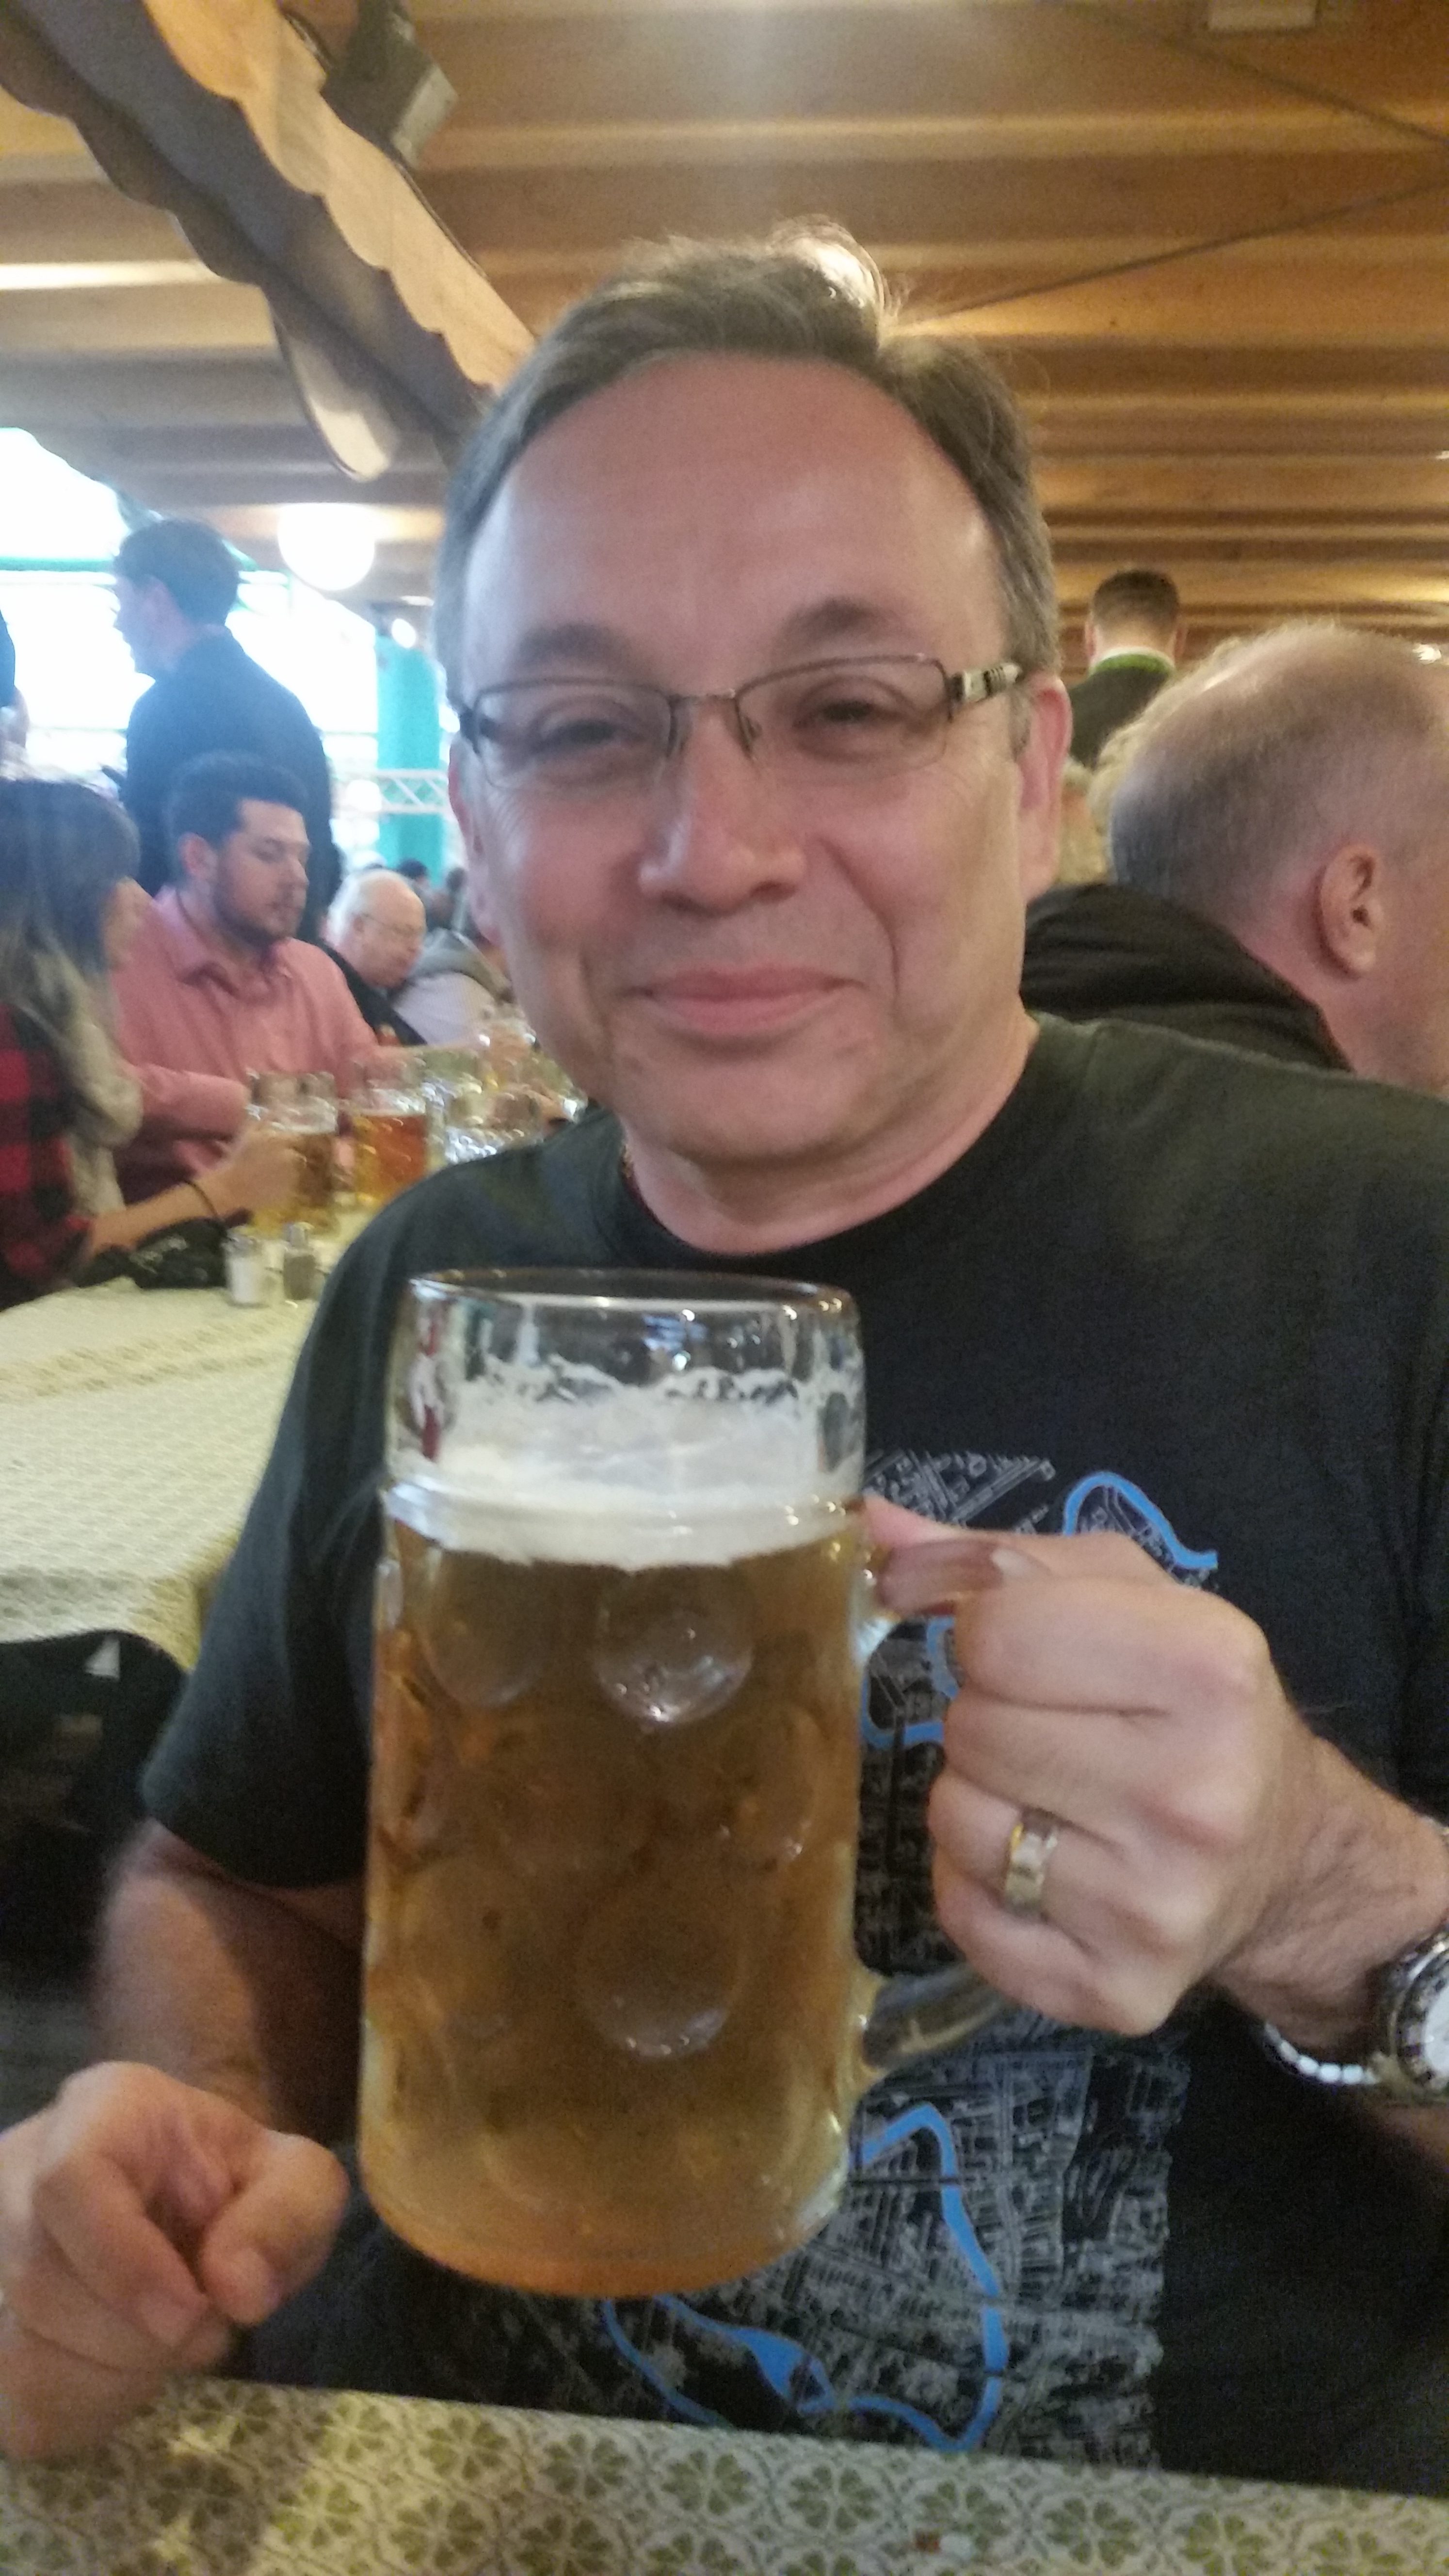 Prost drinking a beer in Germany at Oktoberfest